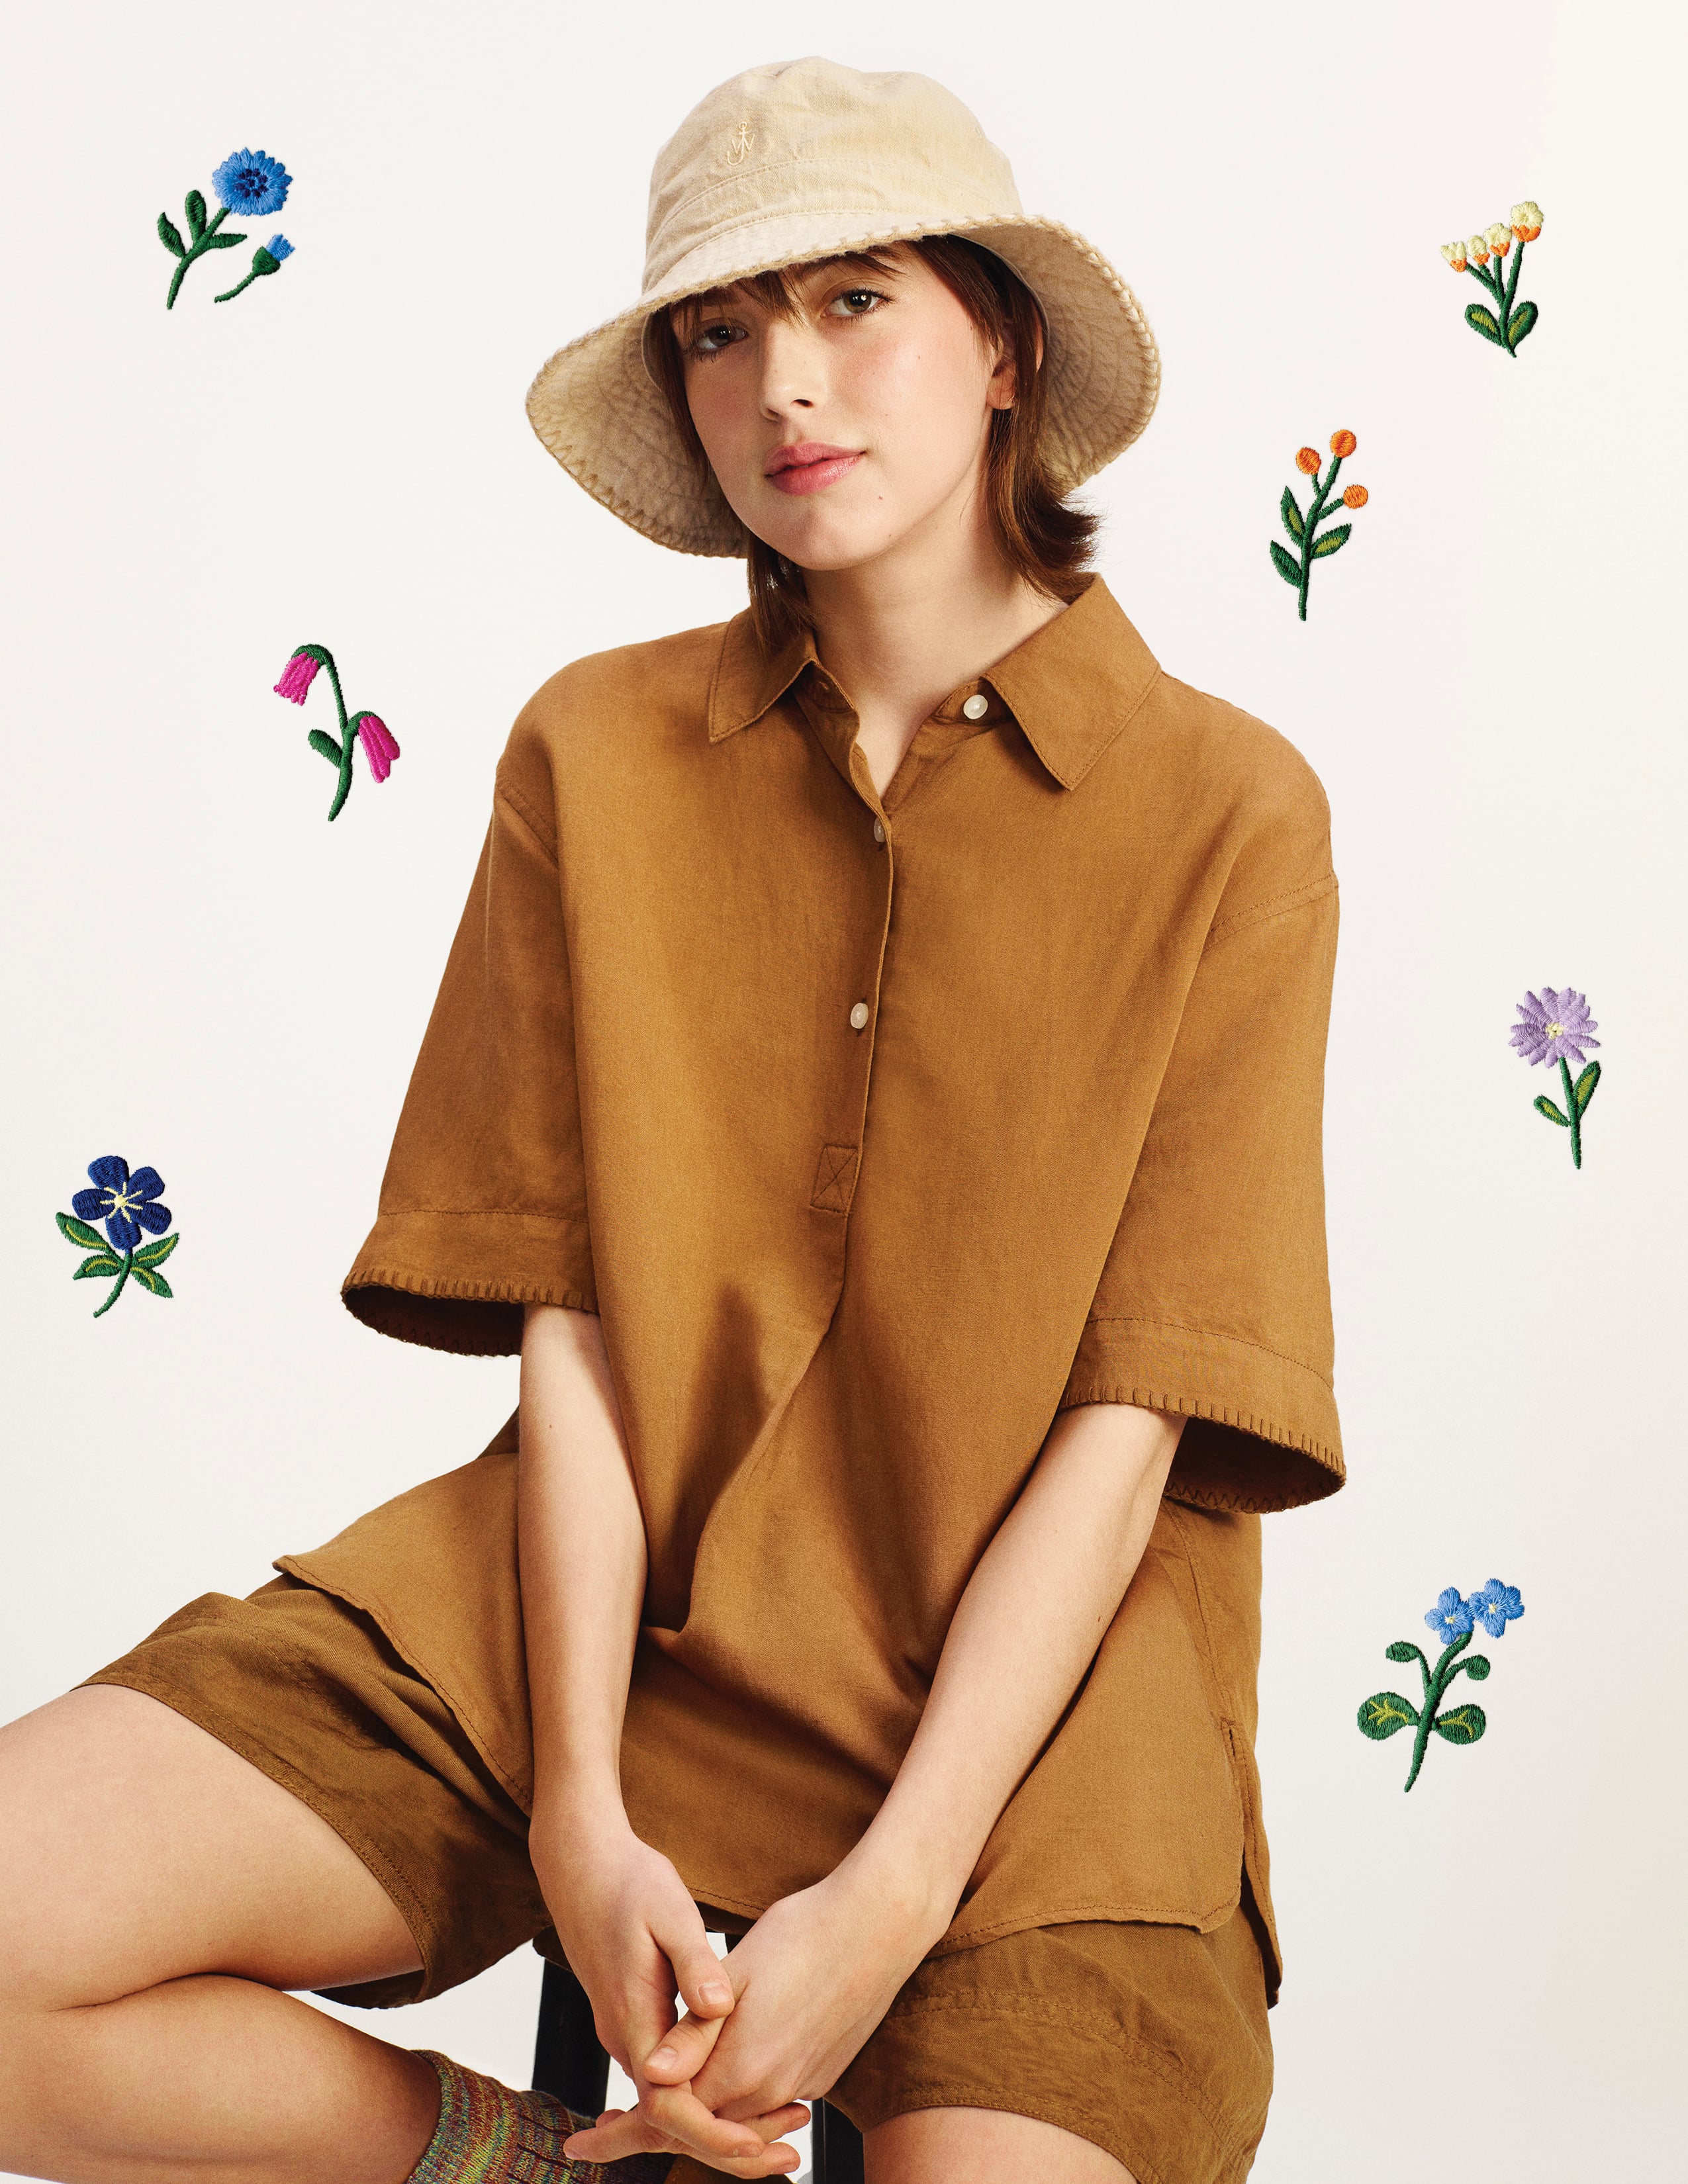 JW Anderson x UNIQLO Spring/Summer 2023 Collection